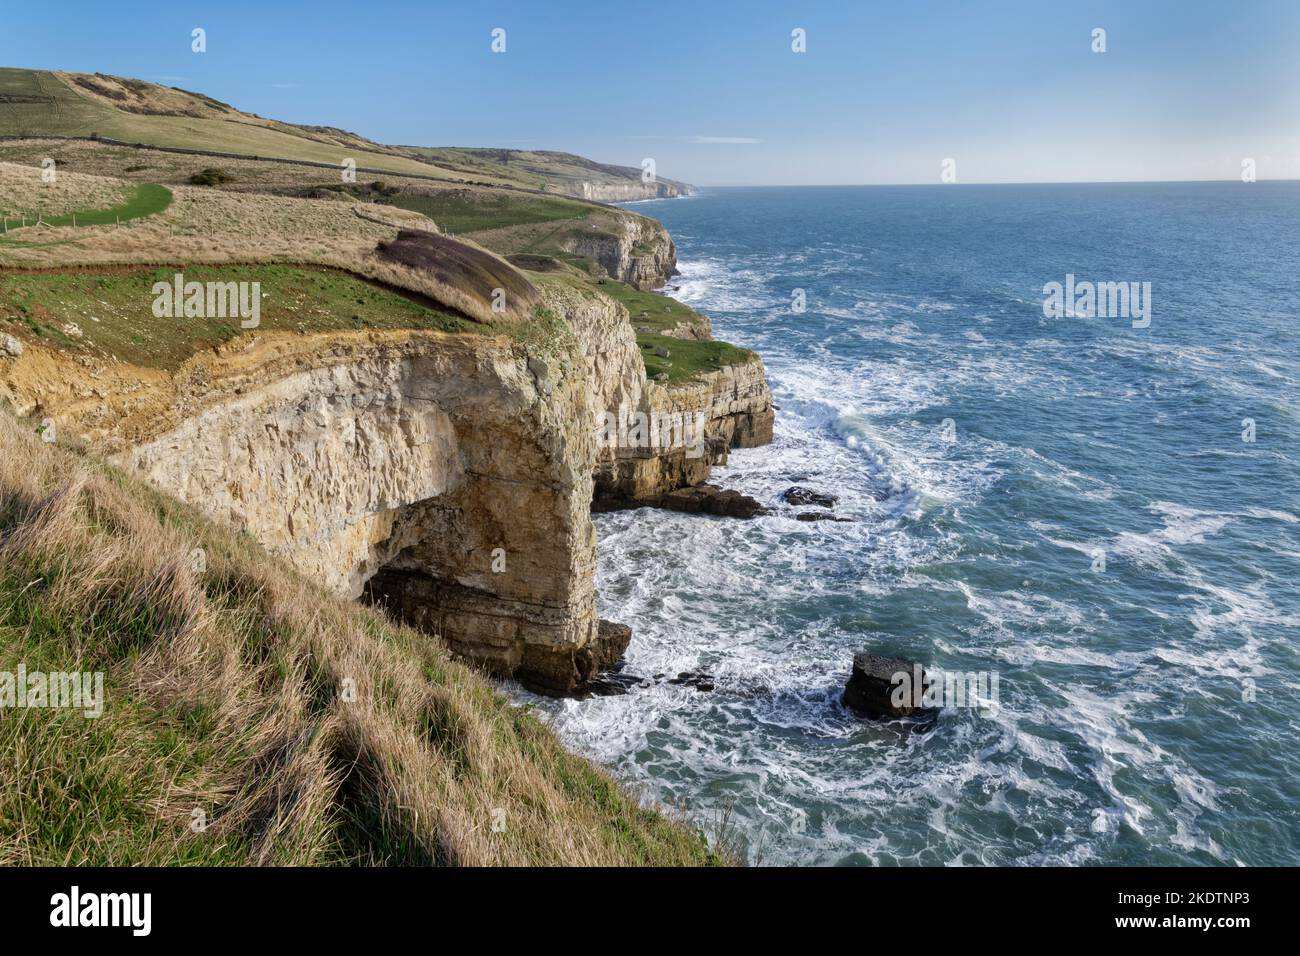 View east along cliffs at Winspit and Seacombe towards Anvil Point, near Worth Matravers, Isle of Purbeck, Dorset, UK, January. Stock Photo